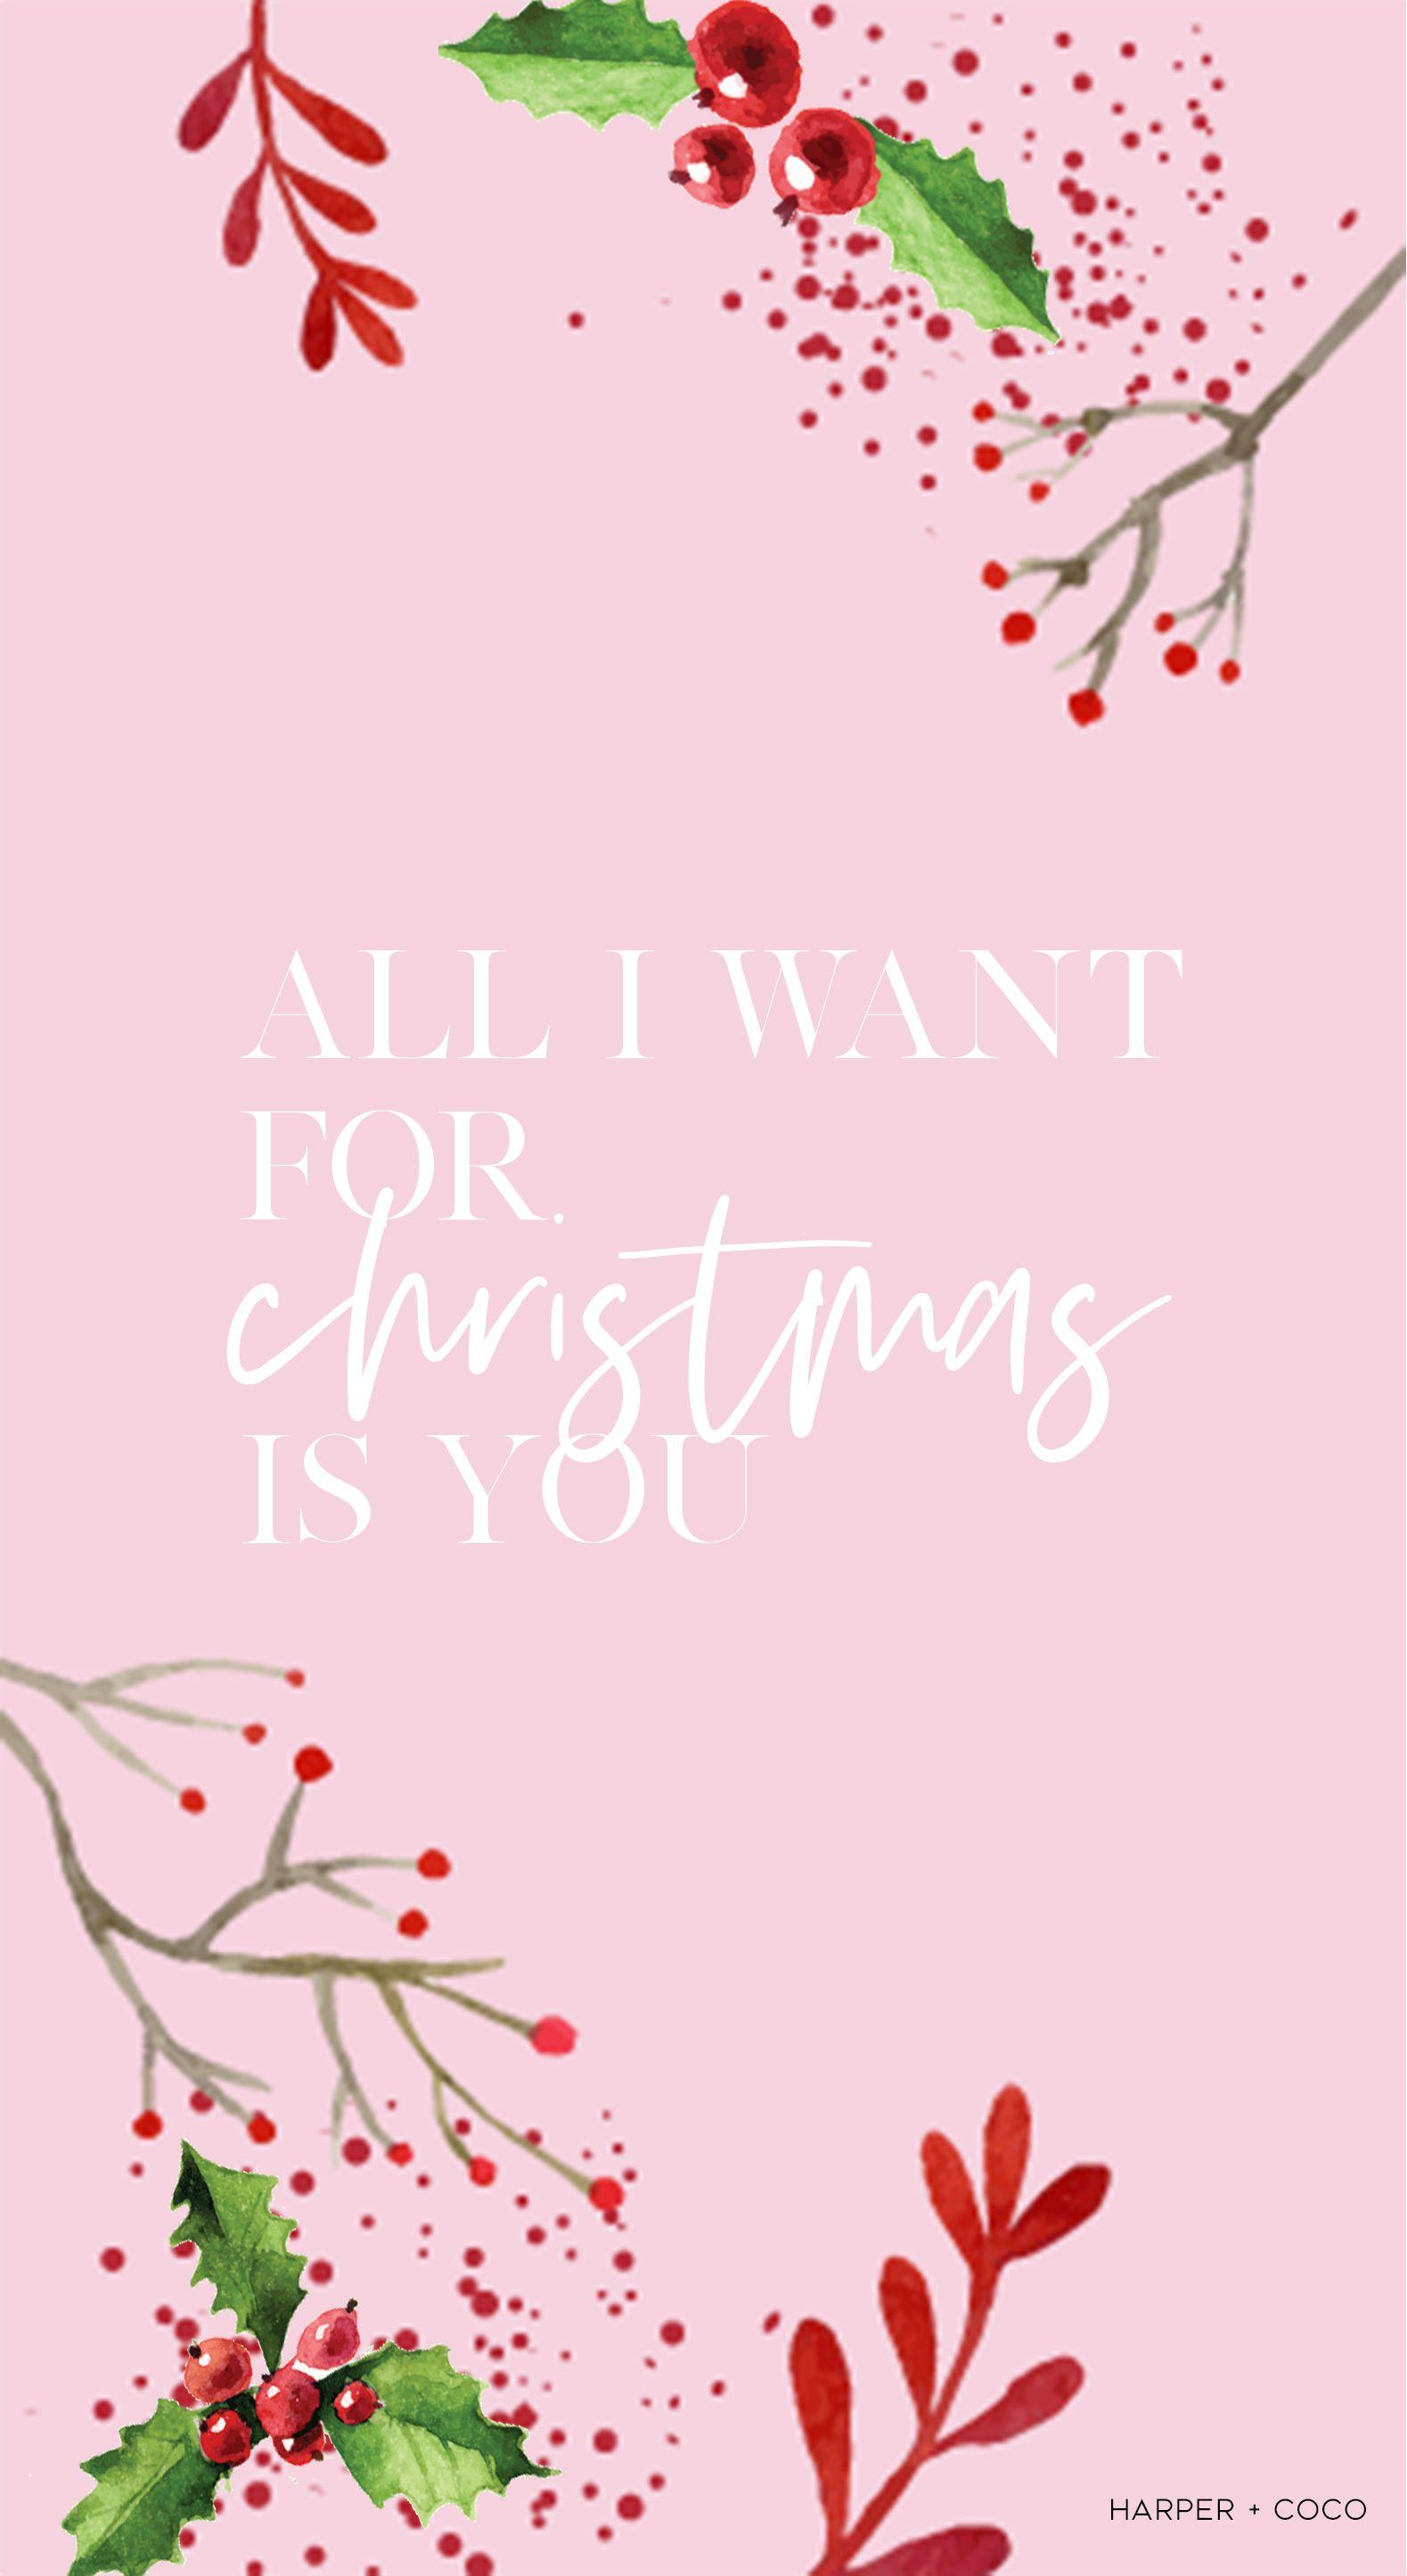 All I want for Christmas is you iPhone wallpaper. Pink